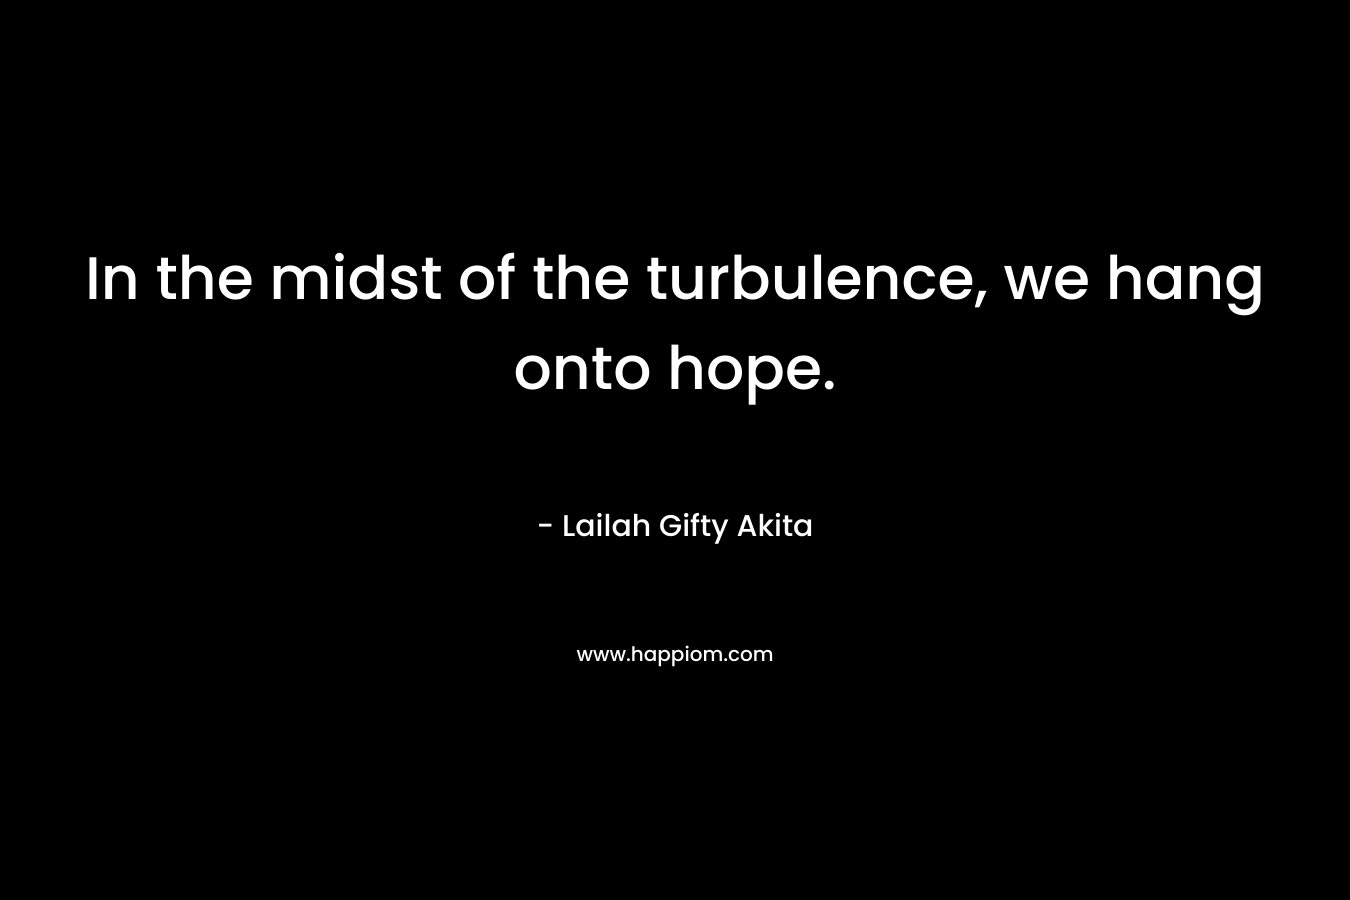 In the midst of the turbulence, we hang onto hope.